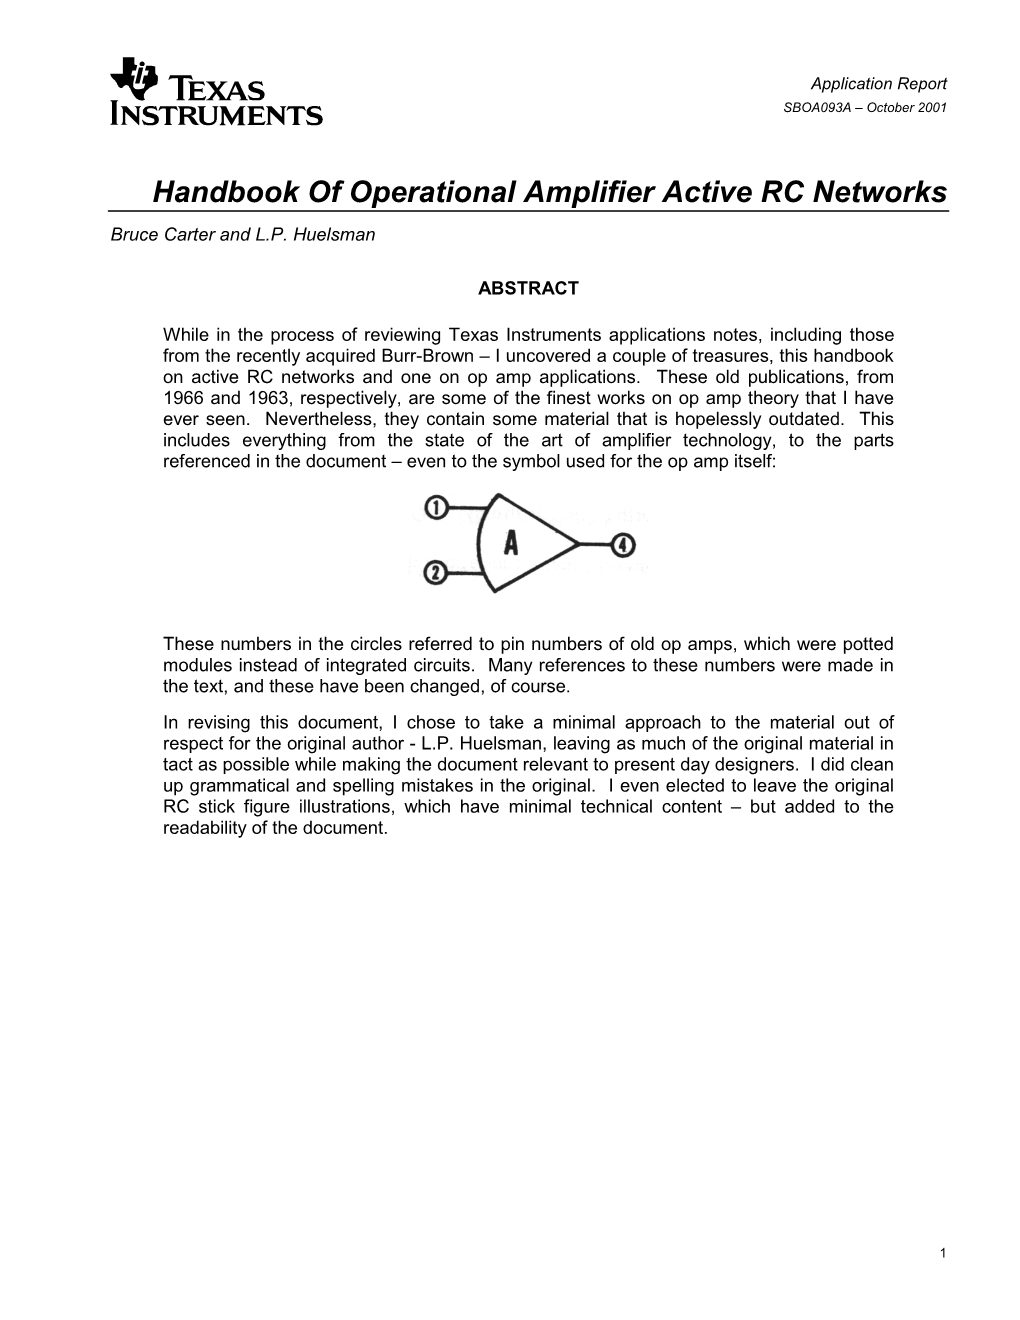 "Handbook of Operational Amplifier Active RC Networks"